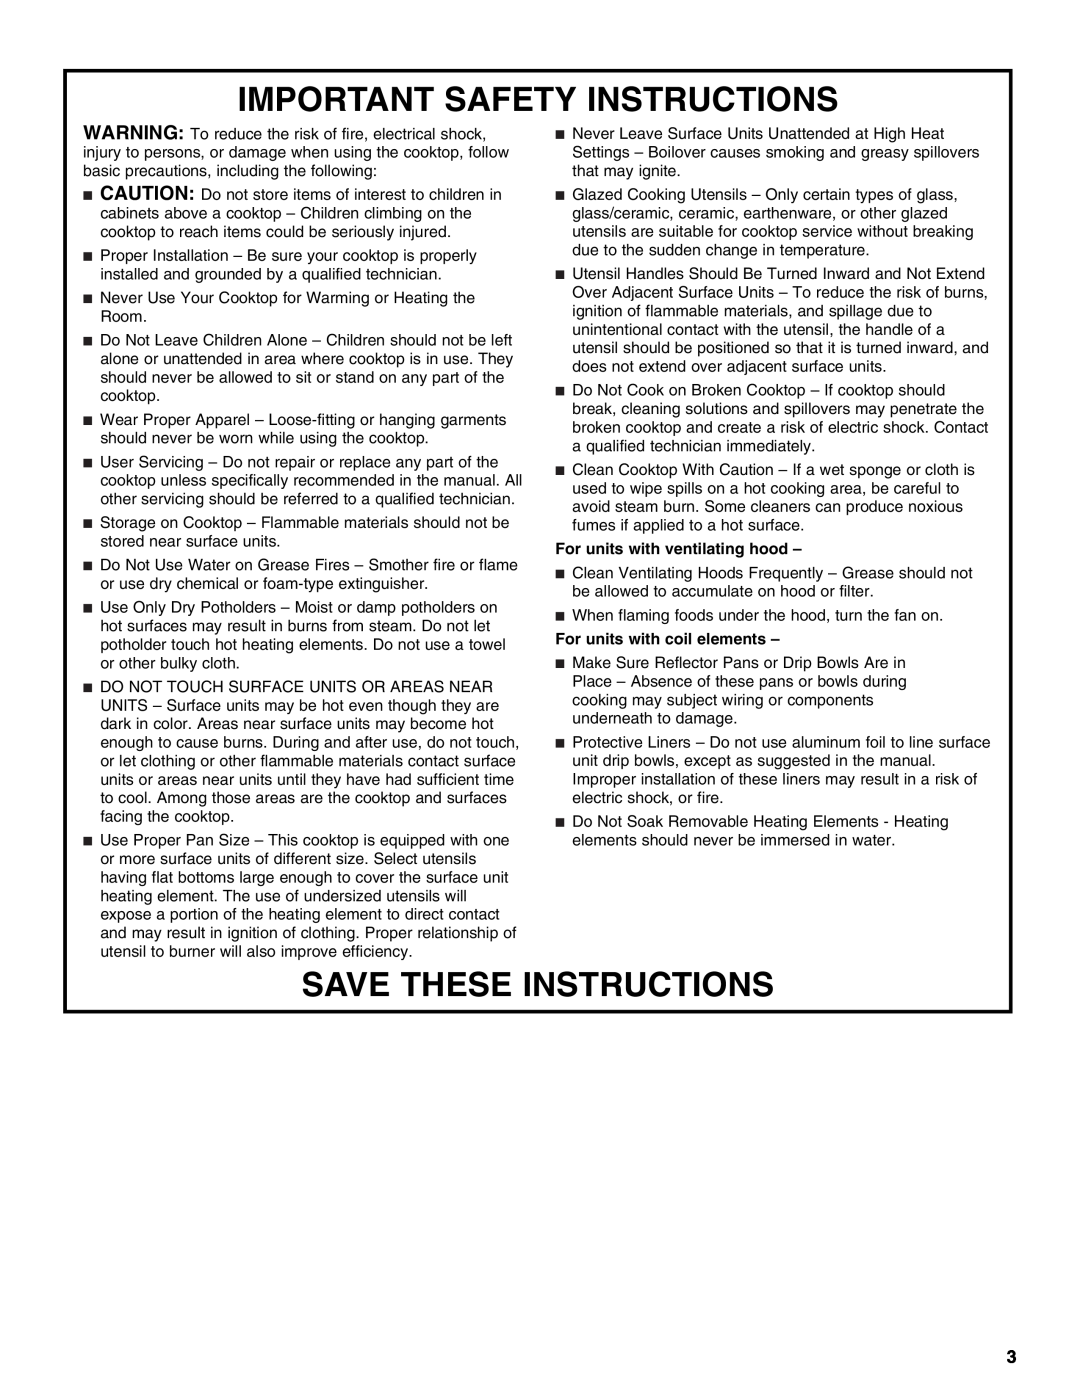 Jenn-Air W10197056B manual Important Safety Instructions, Save These Instructions, For units with ventilating hood 